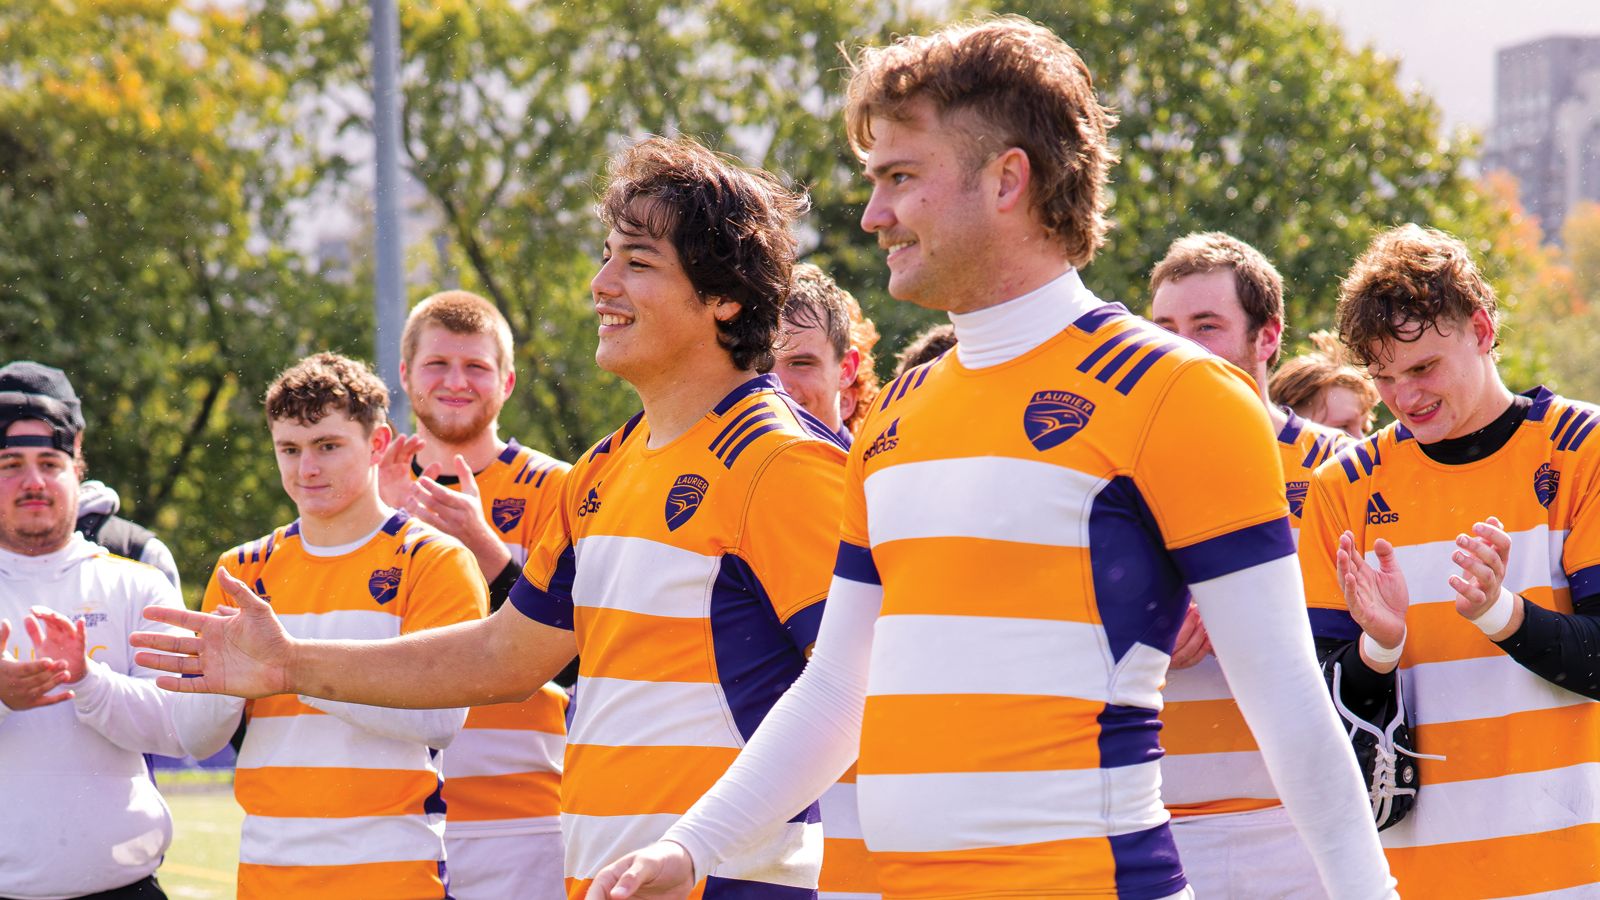 Wilfrid Laurier men's rugby players Dylan Di Girolamo and Adam McNee walking in front of their teammates while they clap